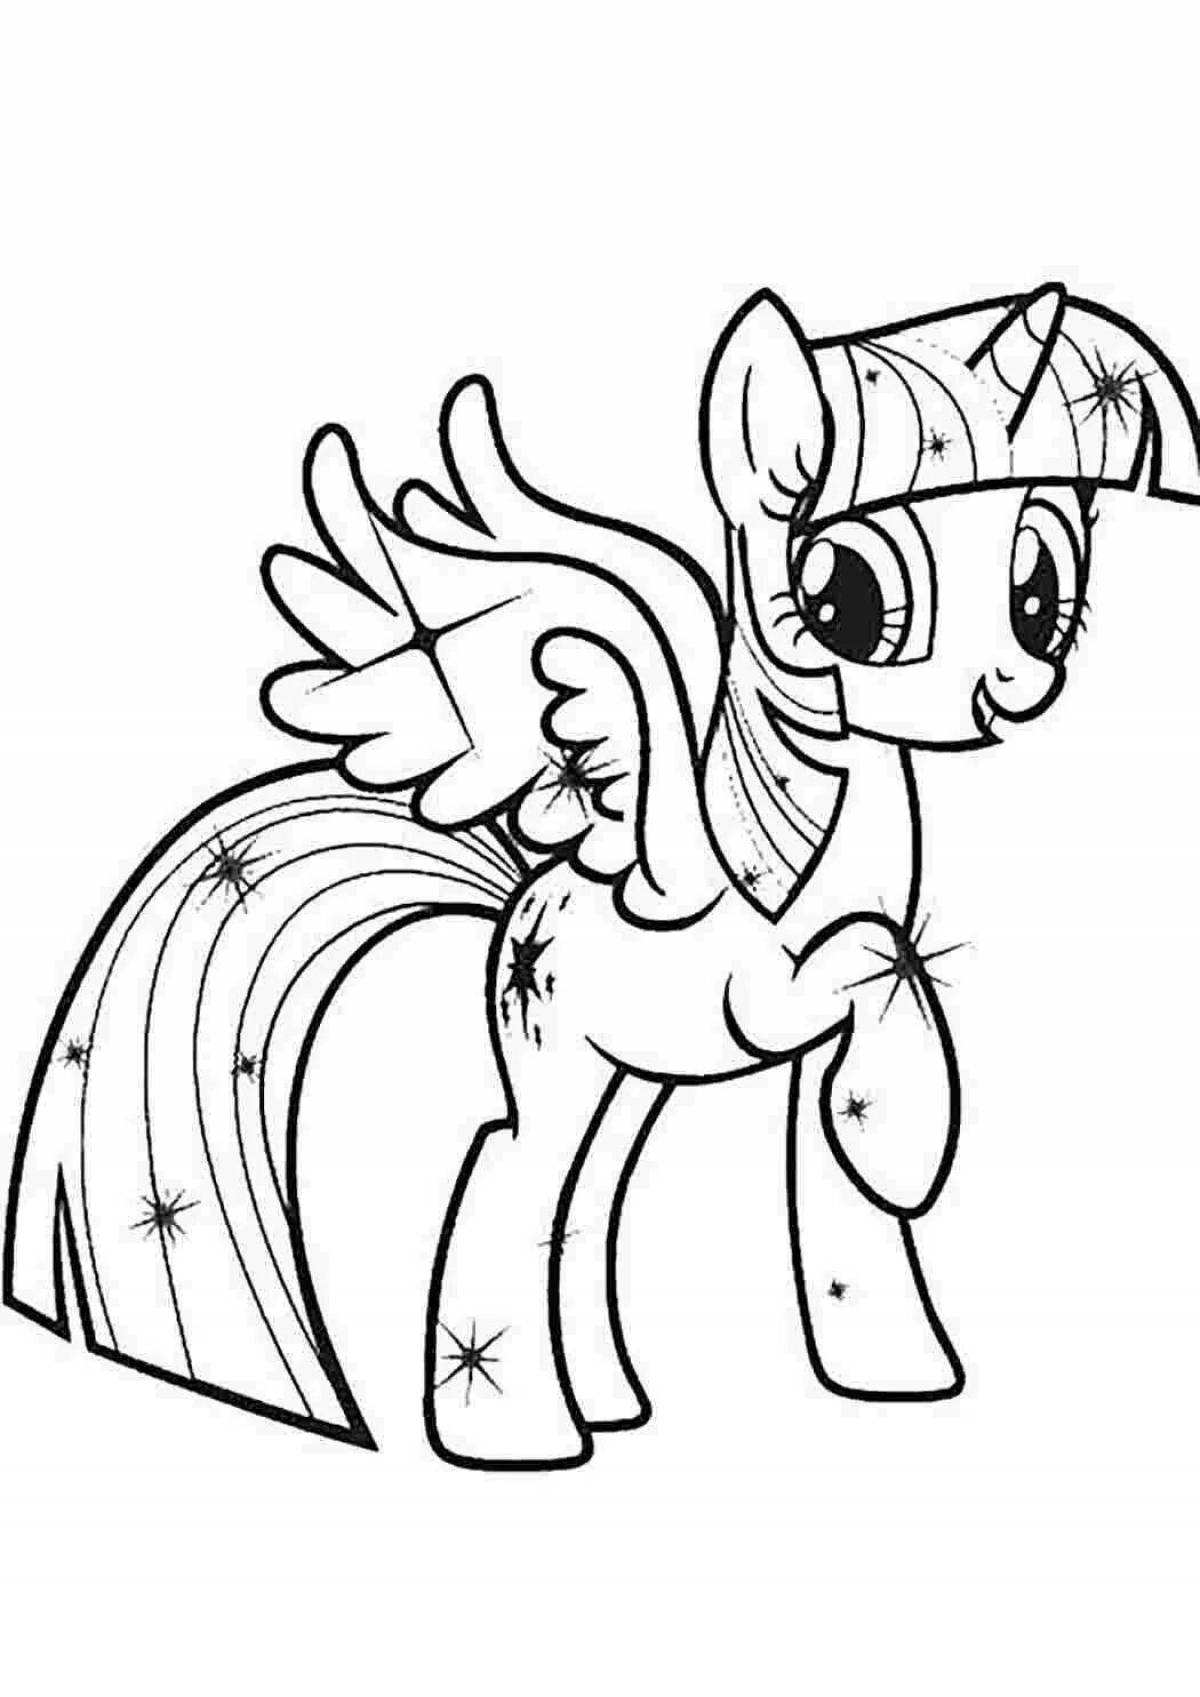 Coloring book glowing twilight sparkle